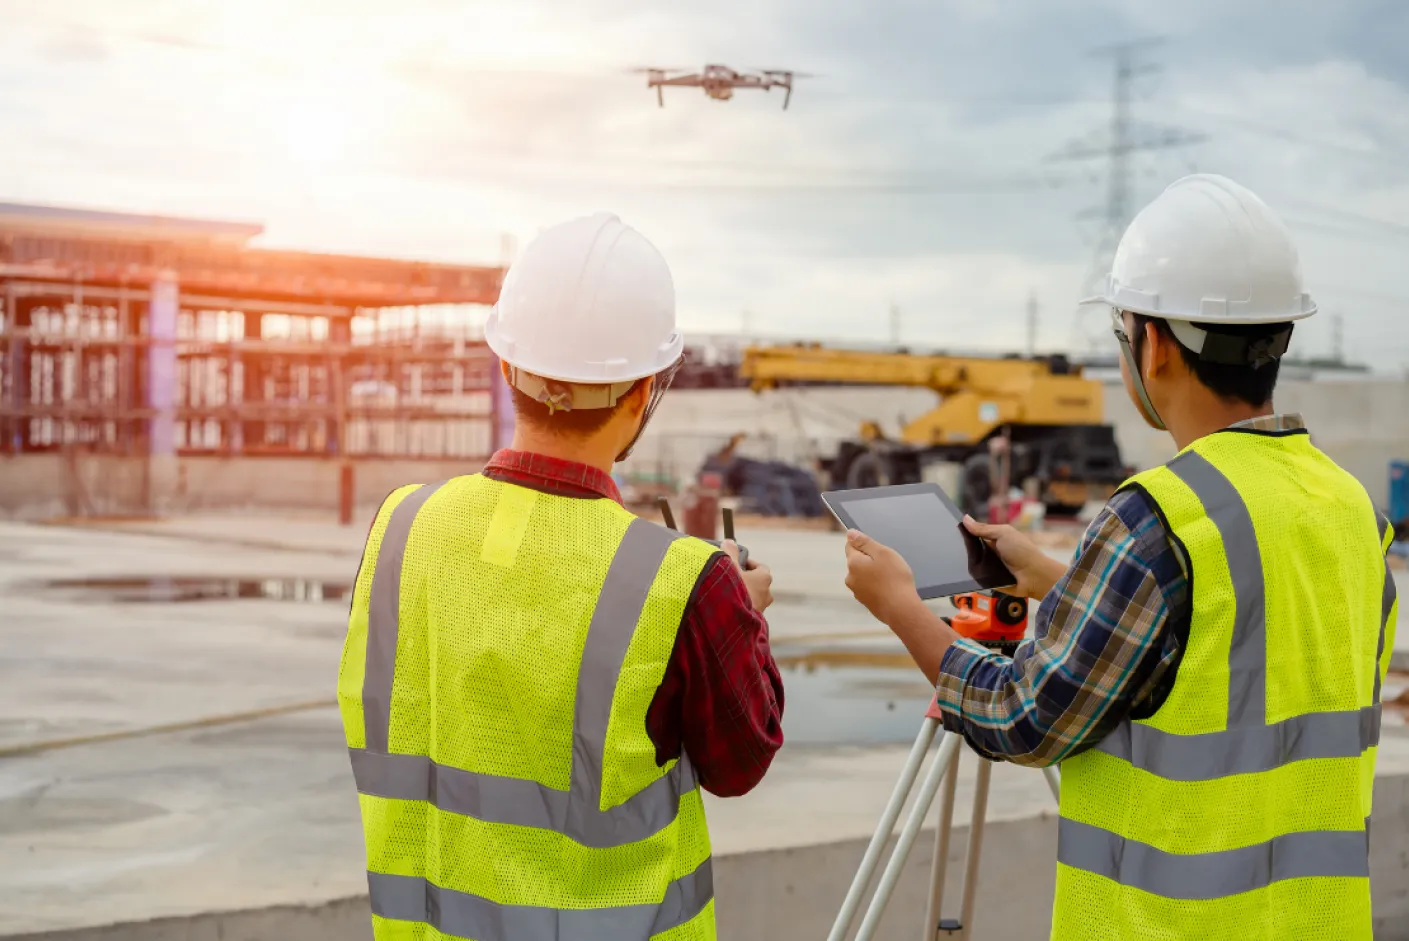 In this study guide, you will learn about the Transport Canada drone exam in detail.